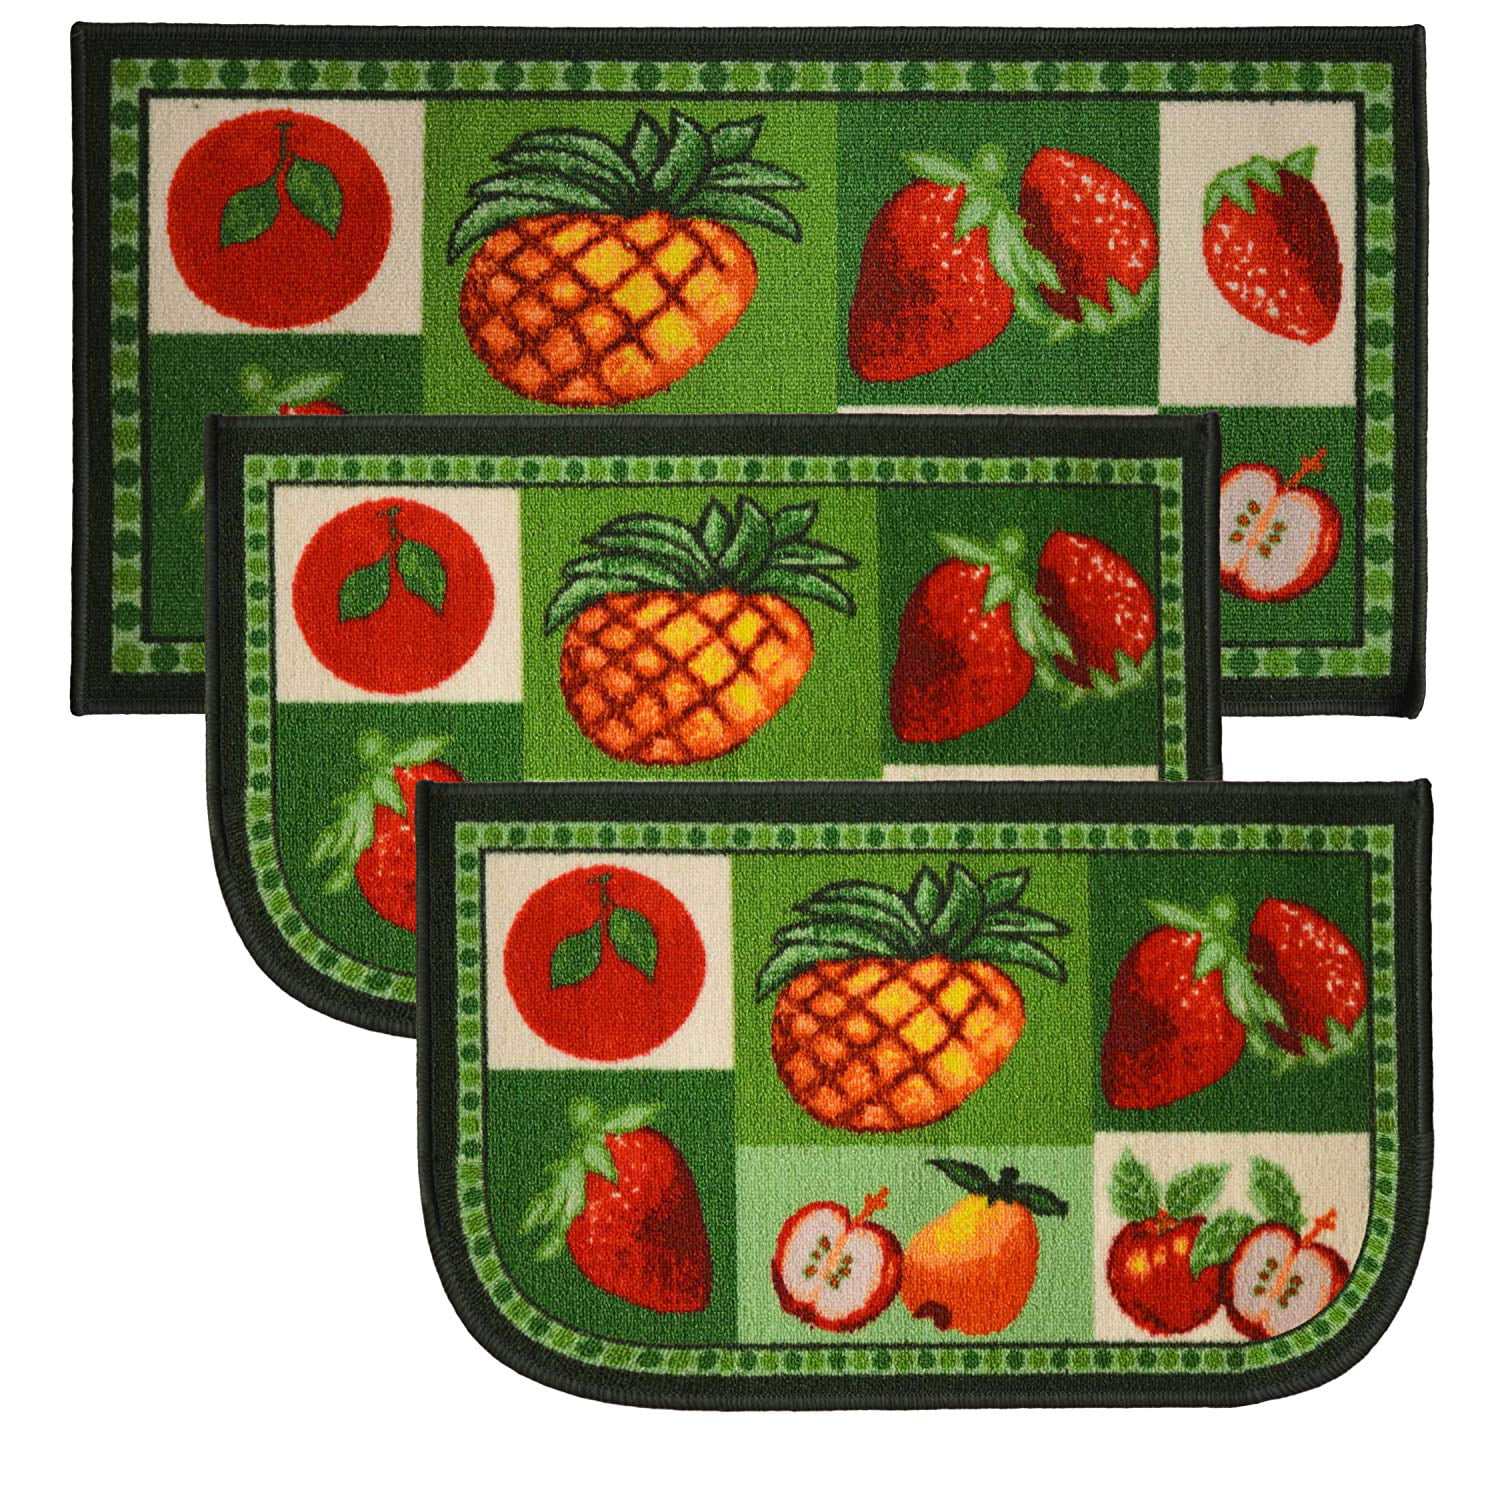 PRINTED NYLON KITCHEN RUG 18"x30" Cat BASKET WITH FRUITS nonskid latex back 